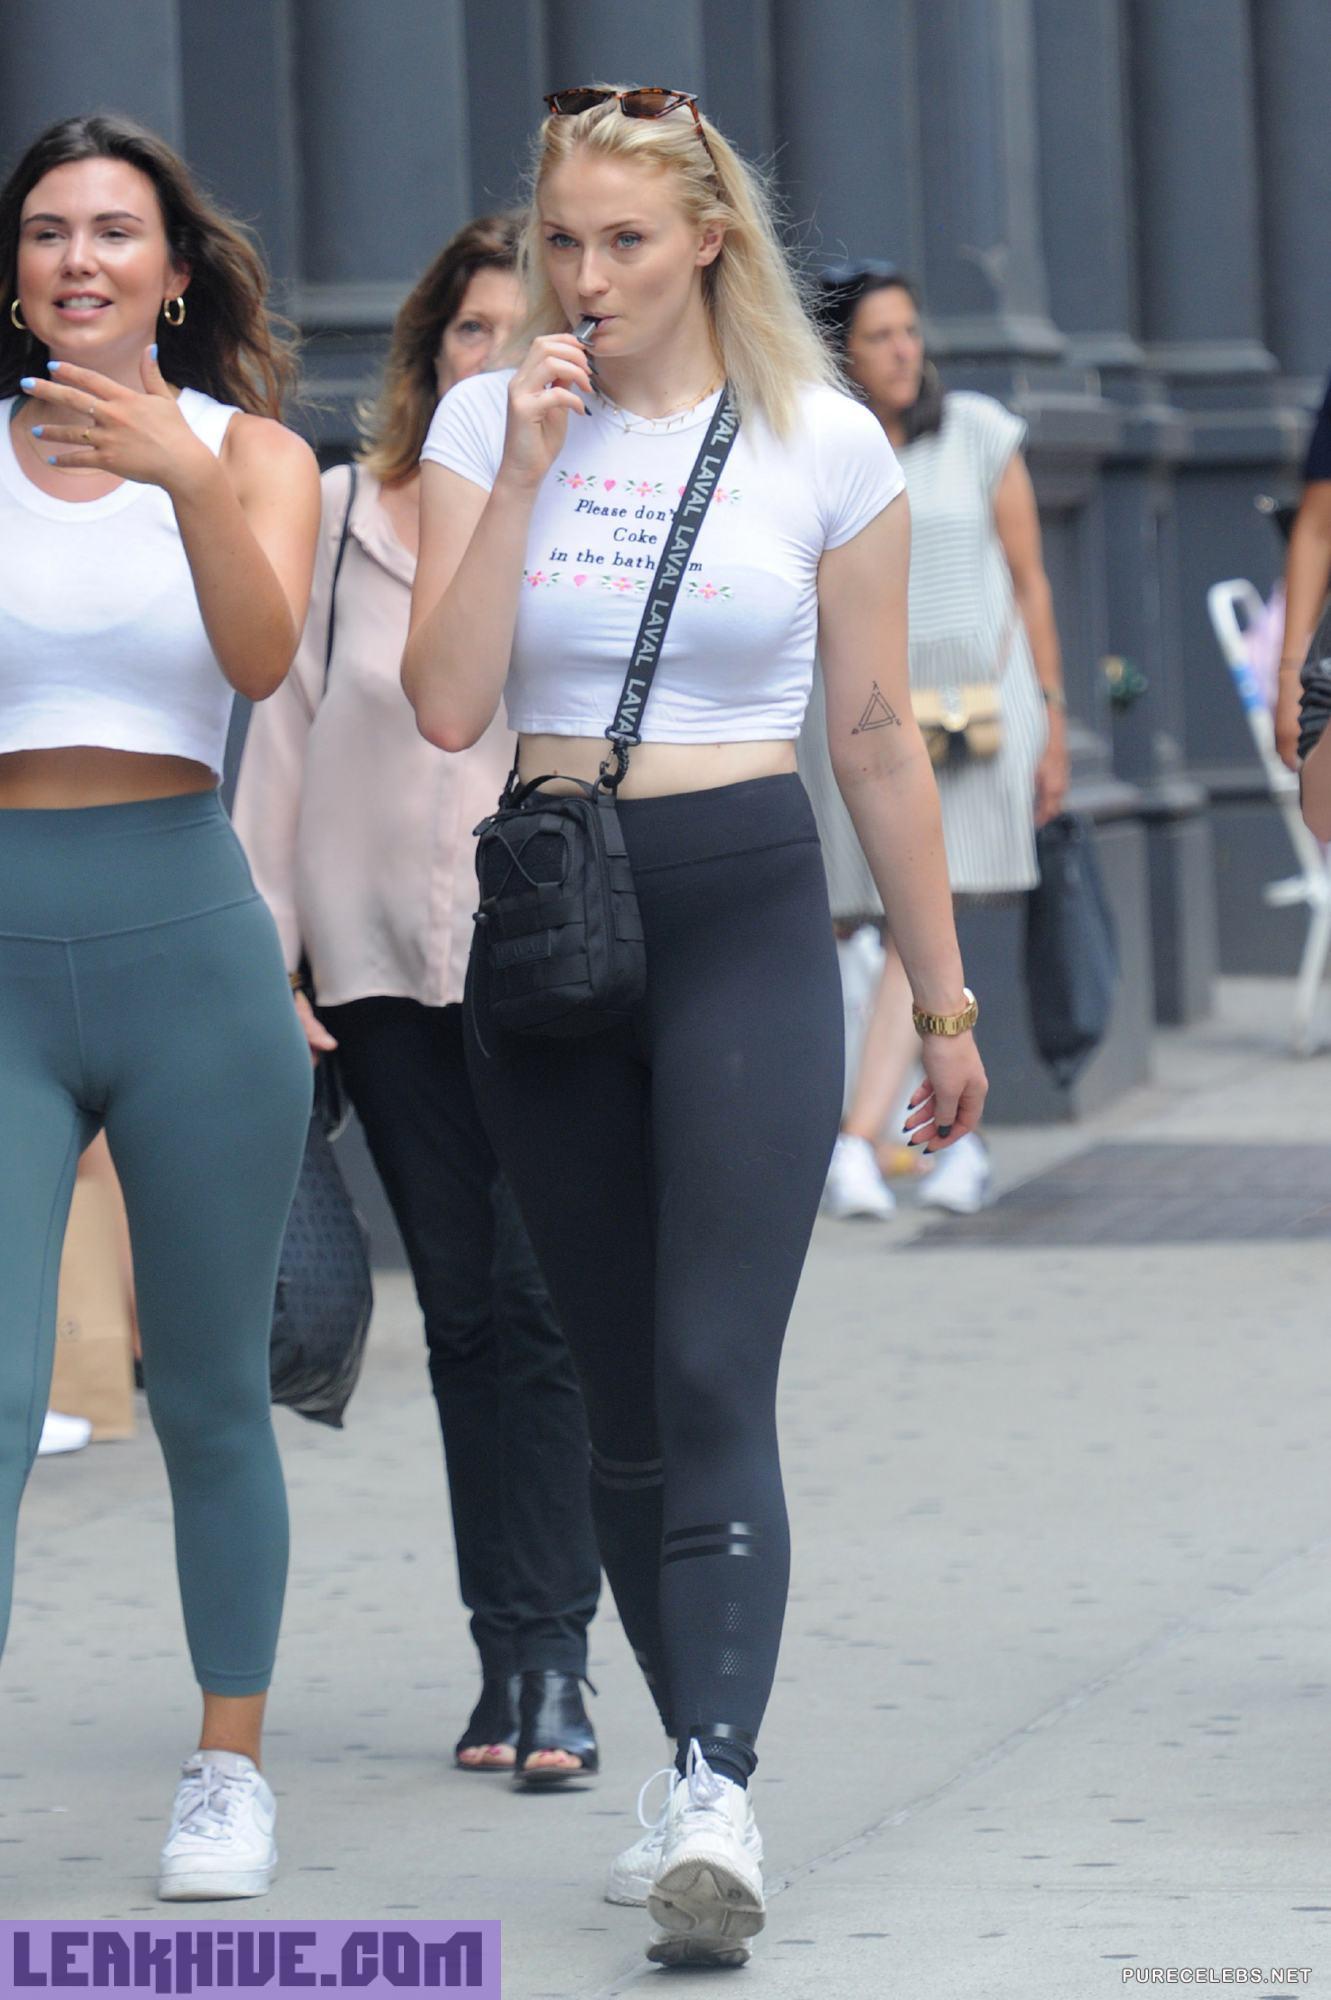 Leaked game of thrones star sophie turner paparazzi braless photos